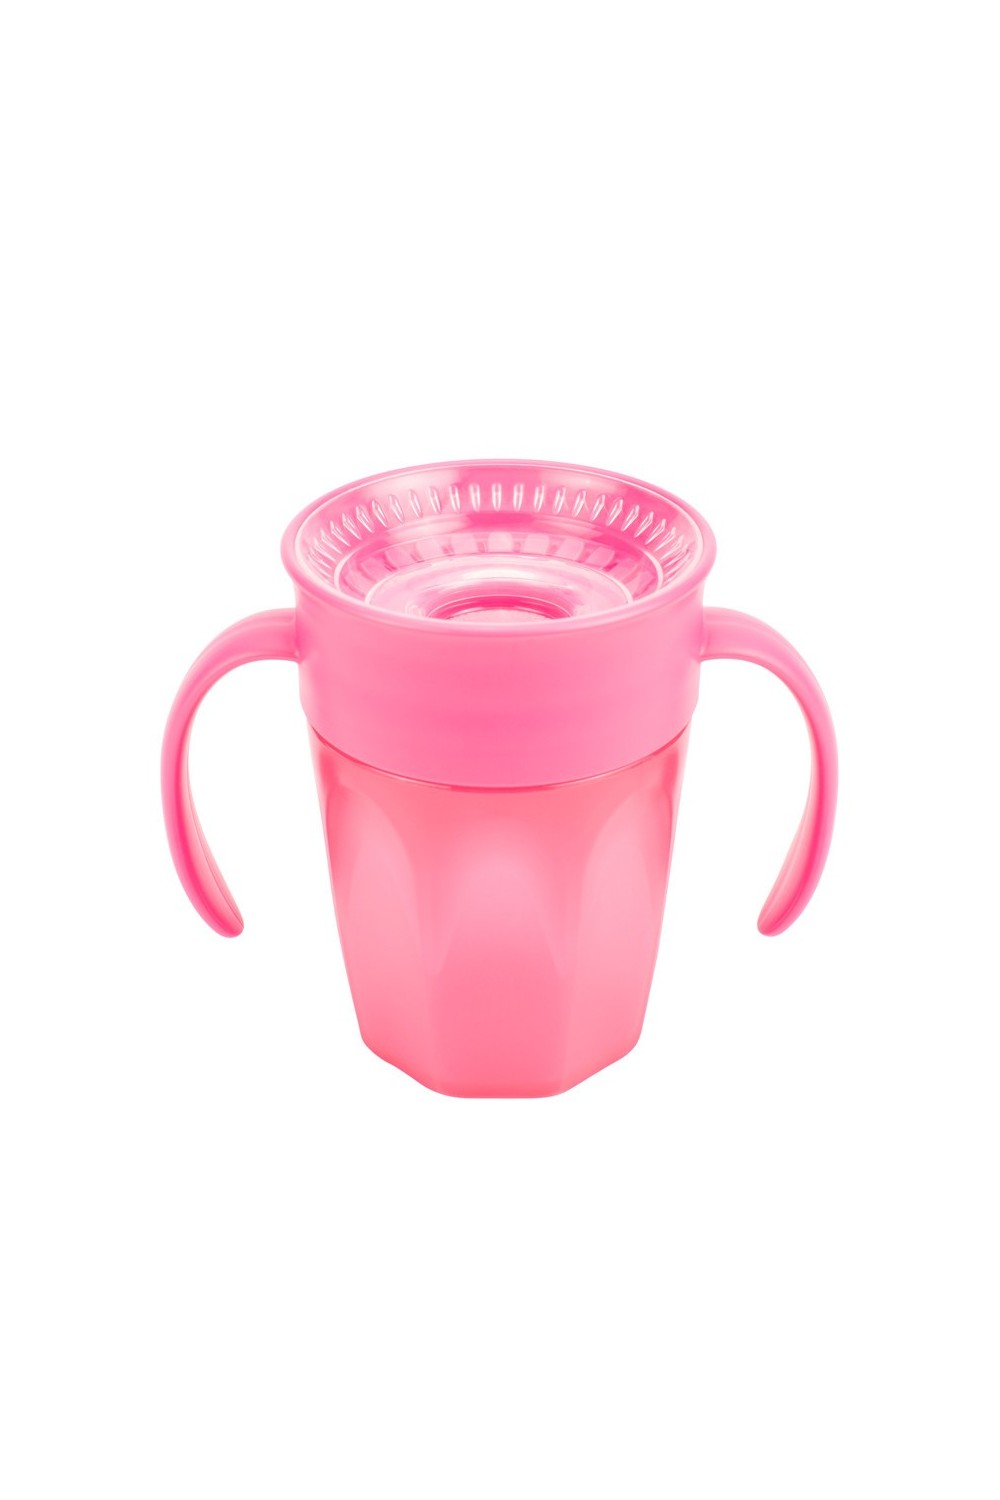 DR. BROWN'S - 360 Tumbler Without Spout Pink With Handles 200ml